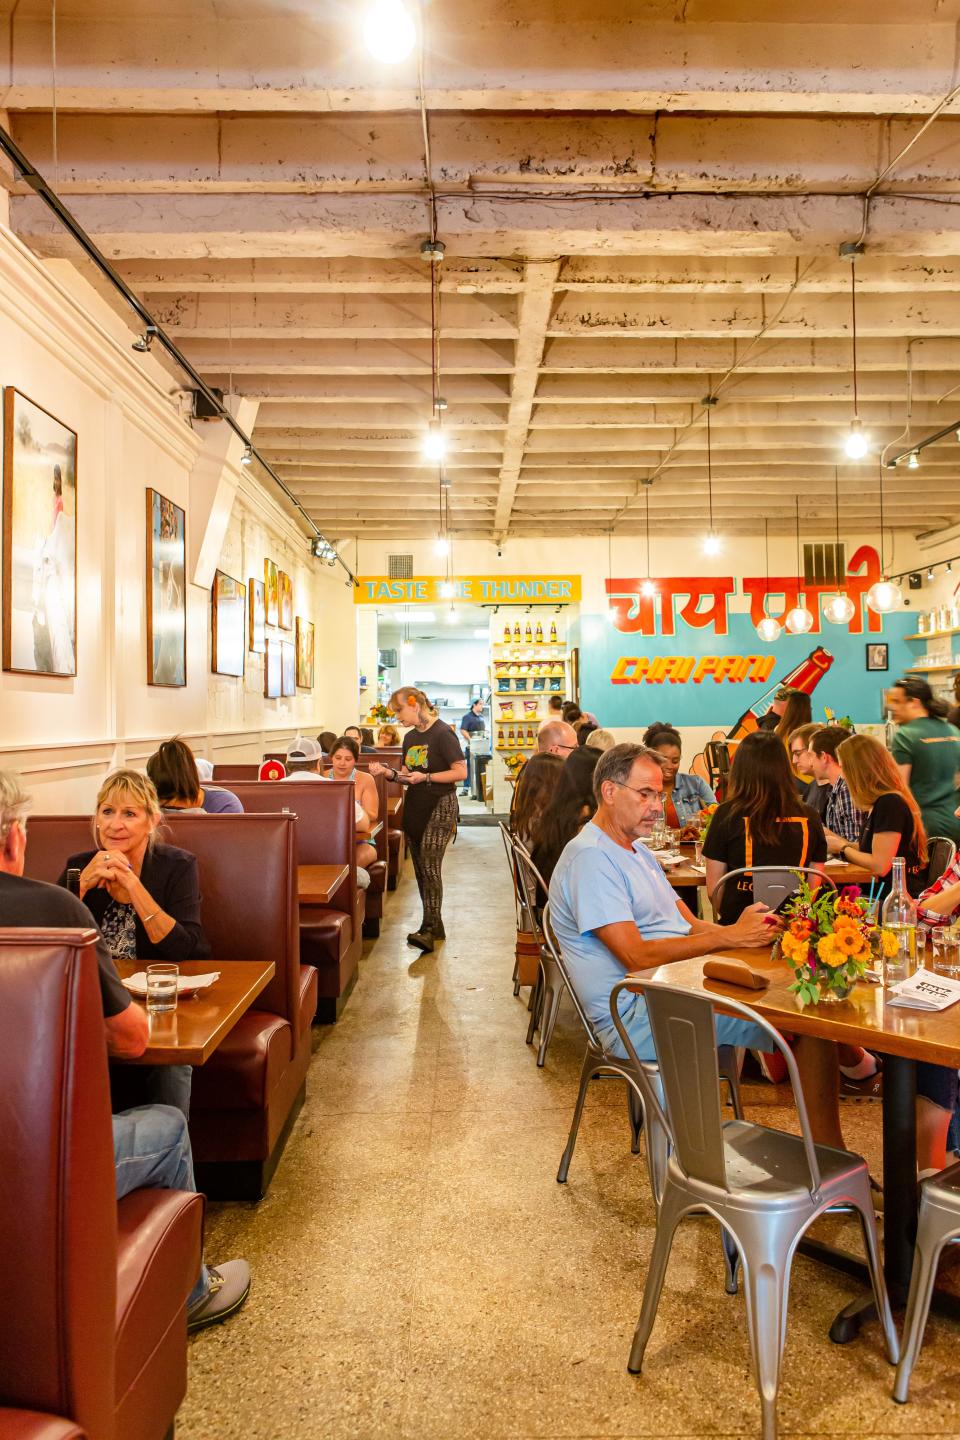 Chai Pani will soon move from its original location to a larger venue with a higher seating capacity.